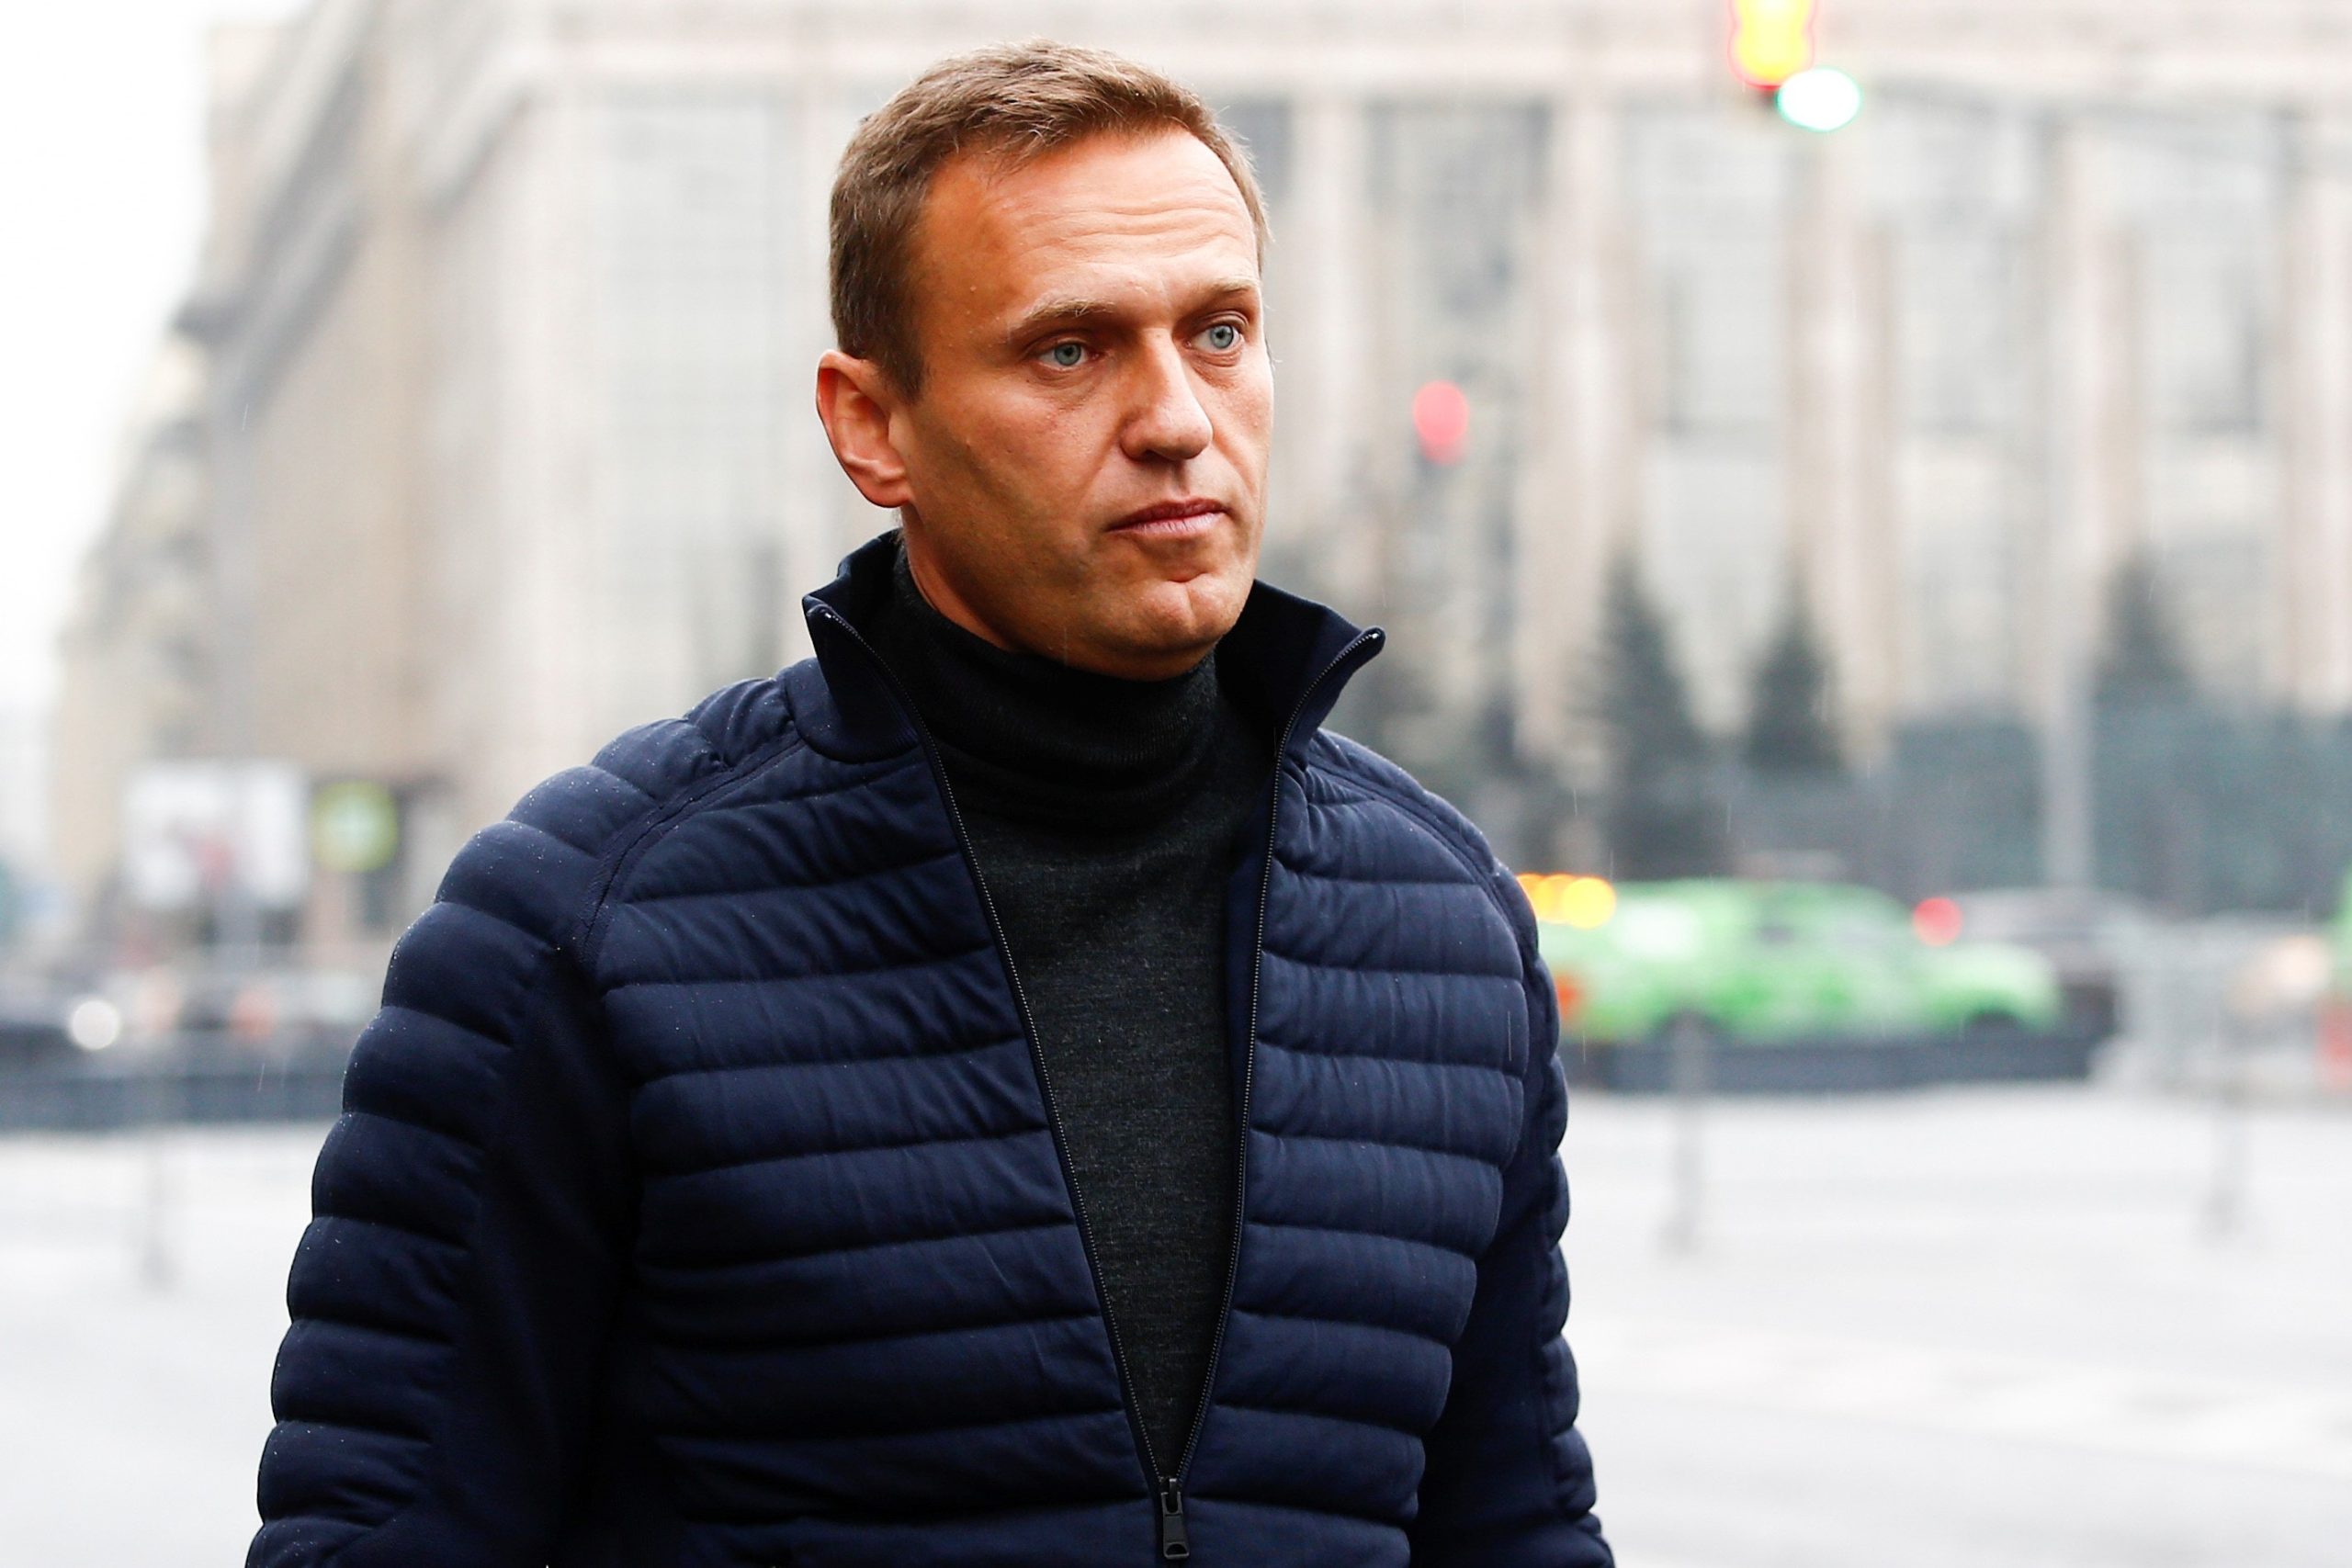 “Russia is Responsible”: Alexey Navalny, Vladimir Putin’s Fiercest Critic, Reported Dead in Arctic Penal Colony